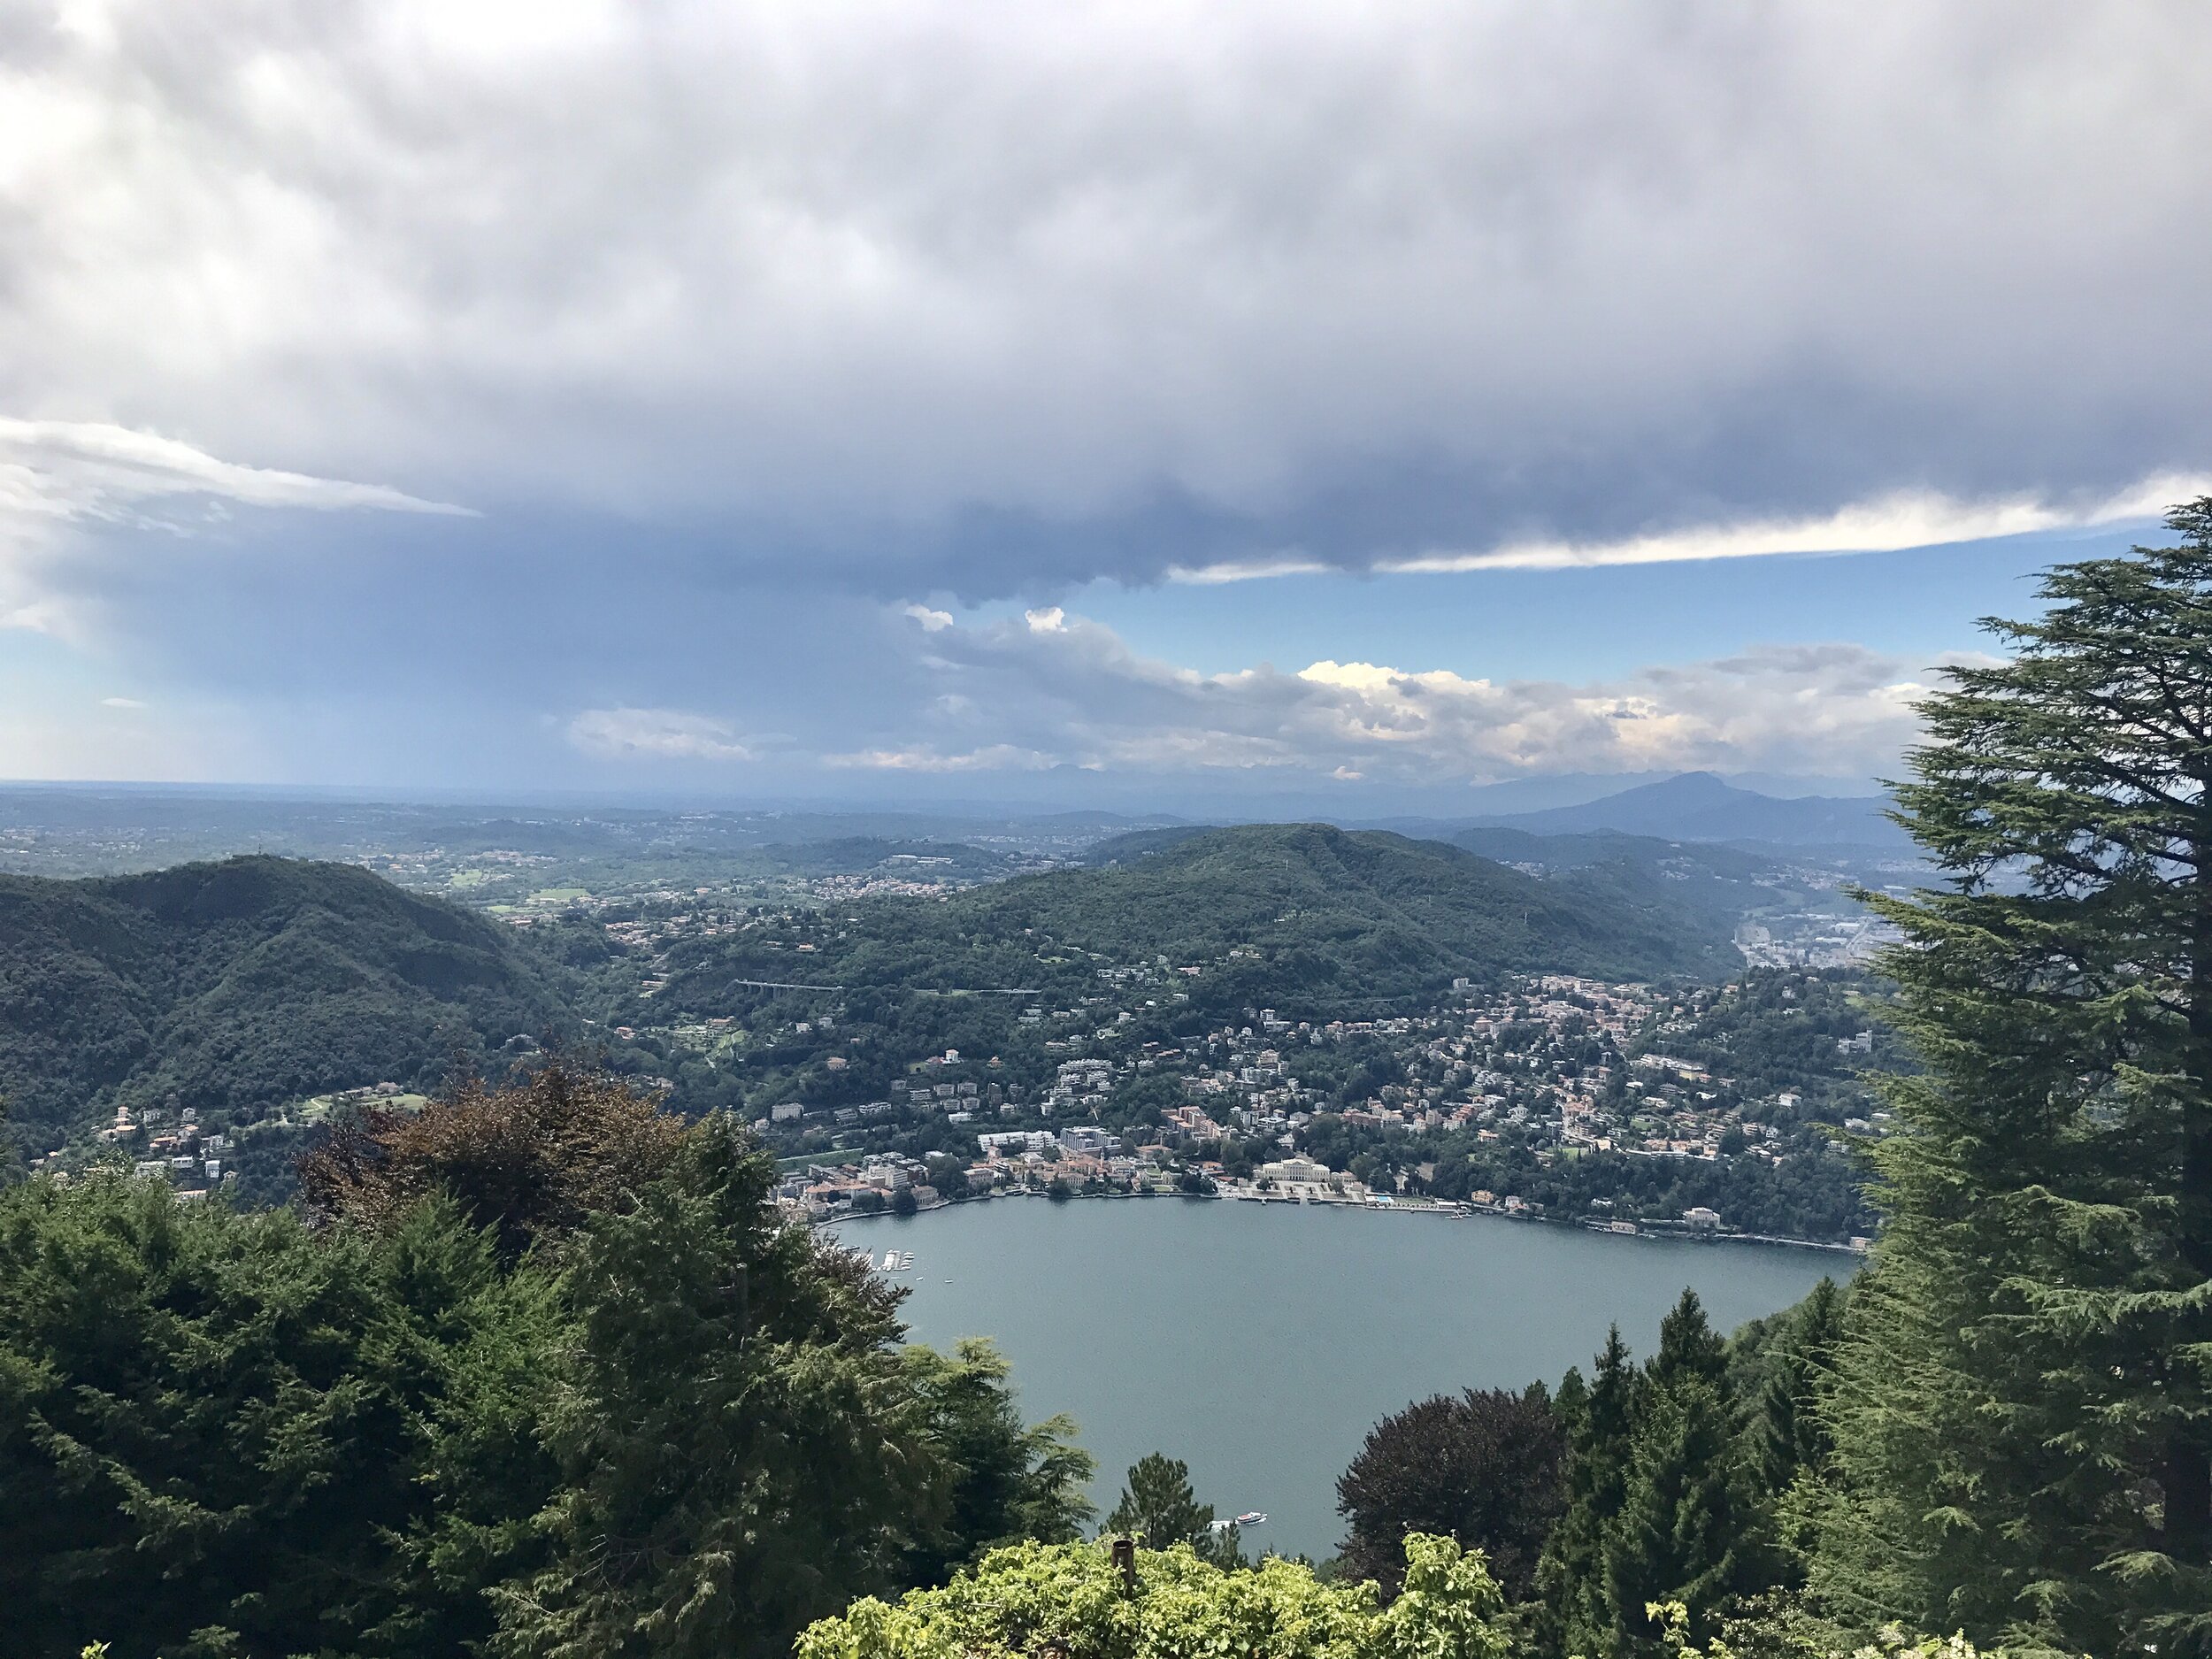 Lake Como Travel Guide: Amazing views of Lake Como after getting the cable car to the top of the mountain